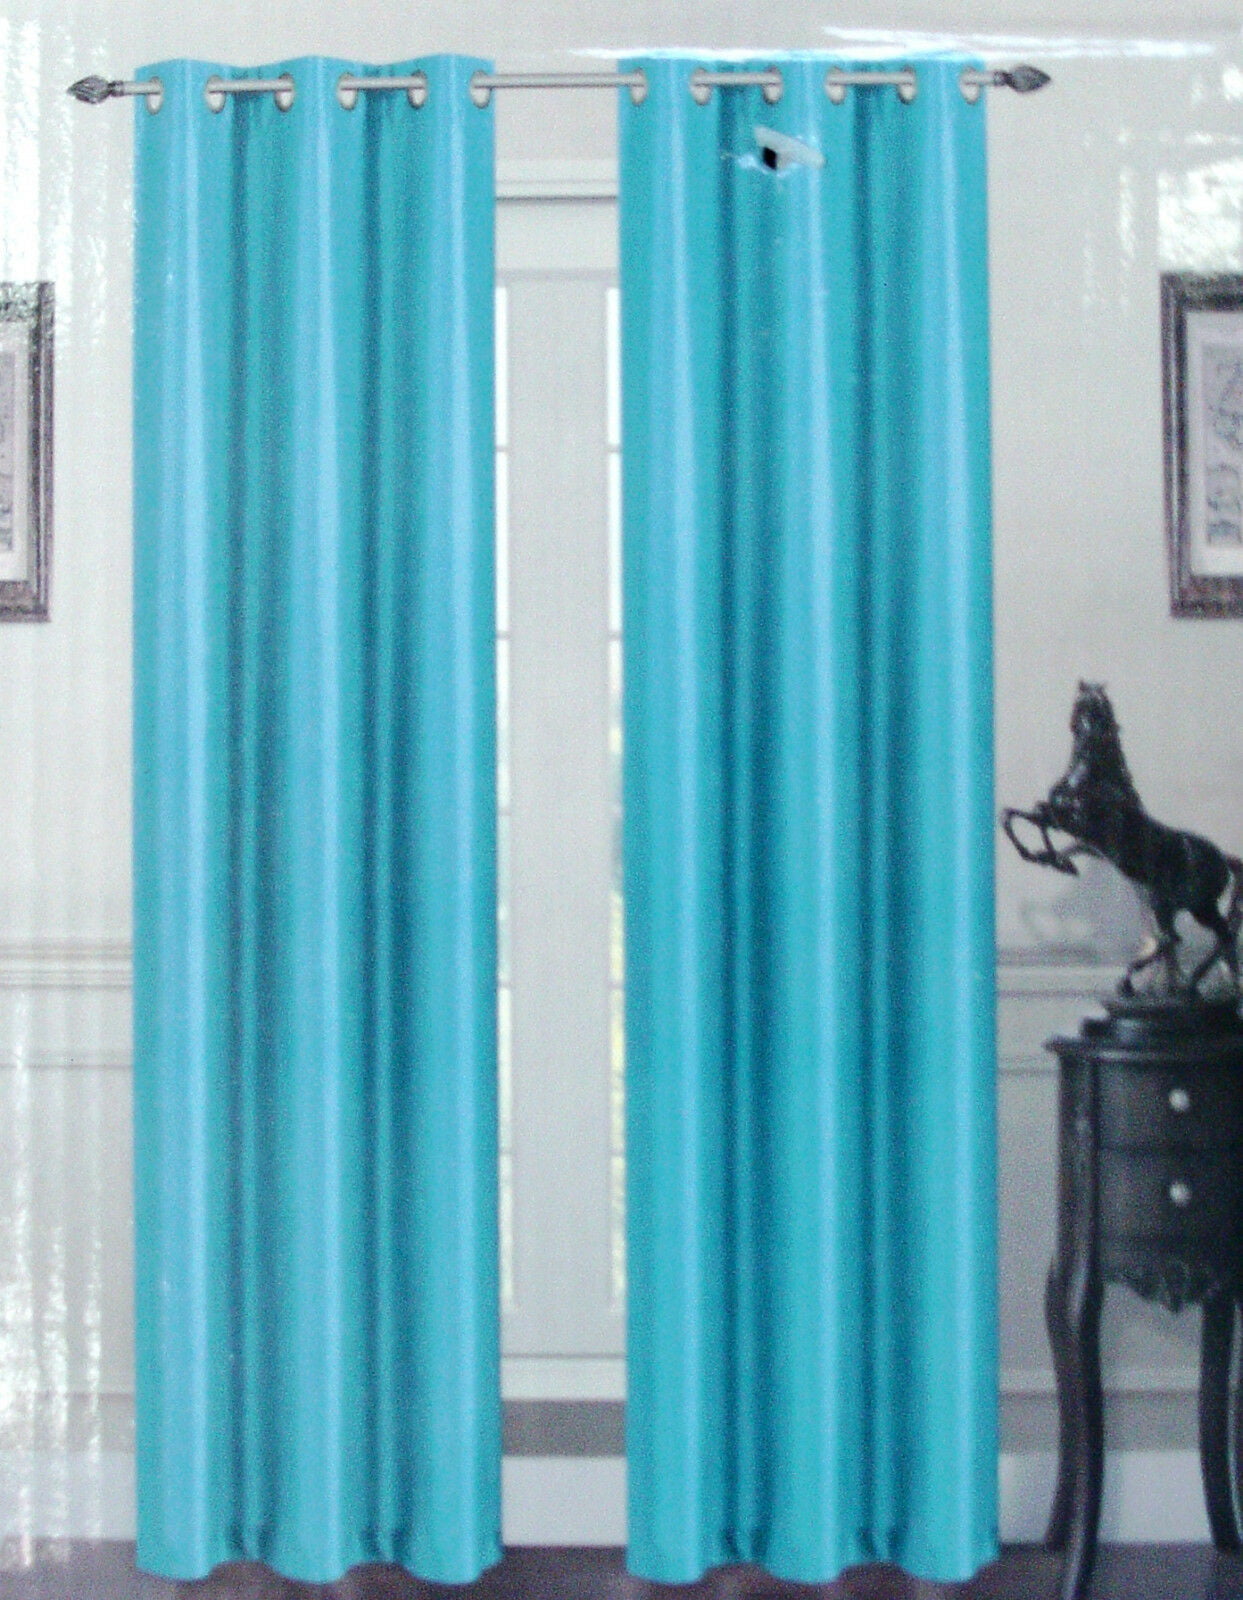 SOLID BLACKOUT WINDOW CURTAINS DRAPE TREATMENT WITH VALANCE HEAVY THICK K42 